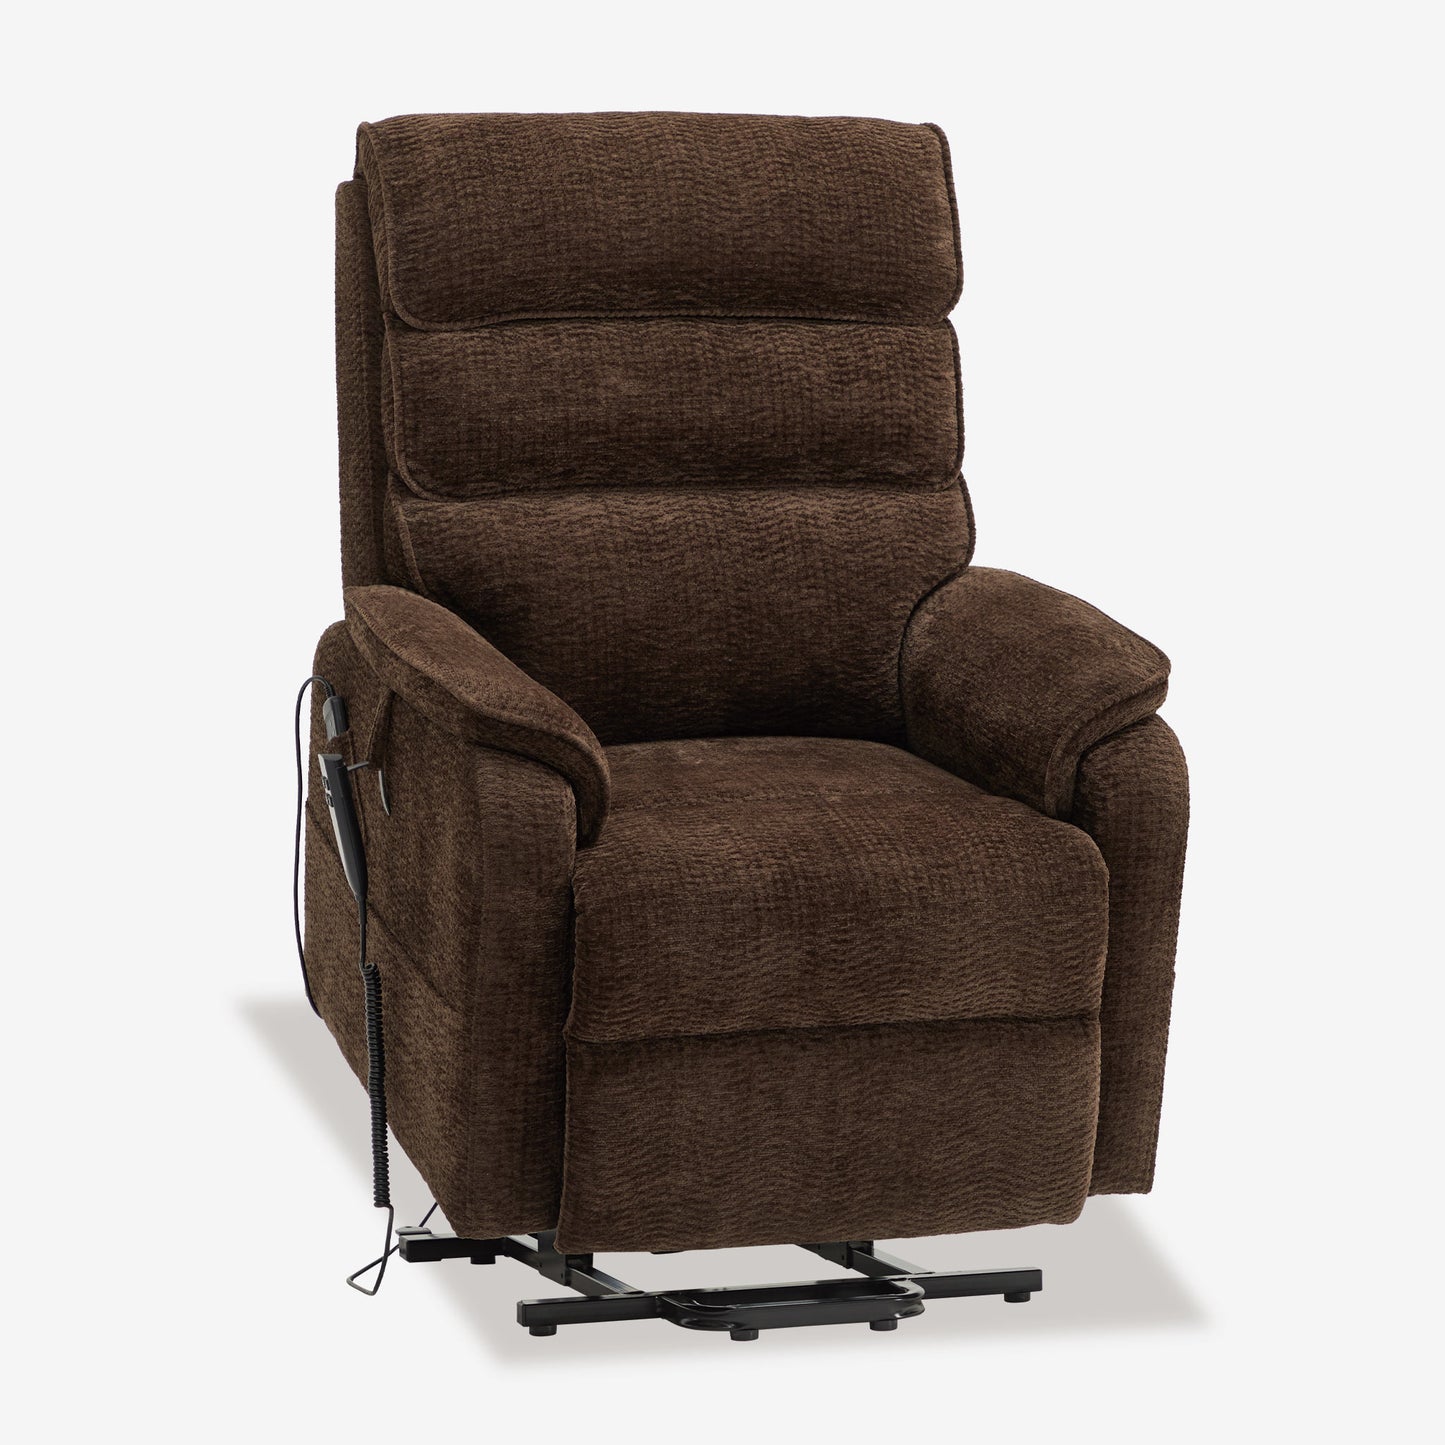 Recliner Lift Chair With Heat And Massage - Infinite Postion